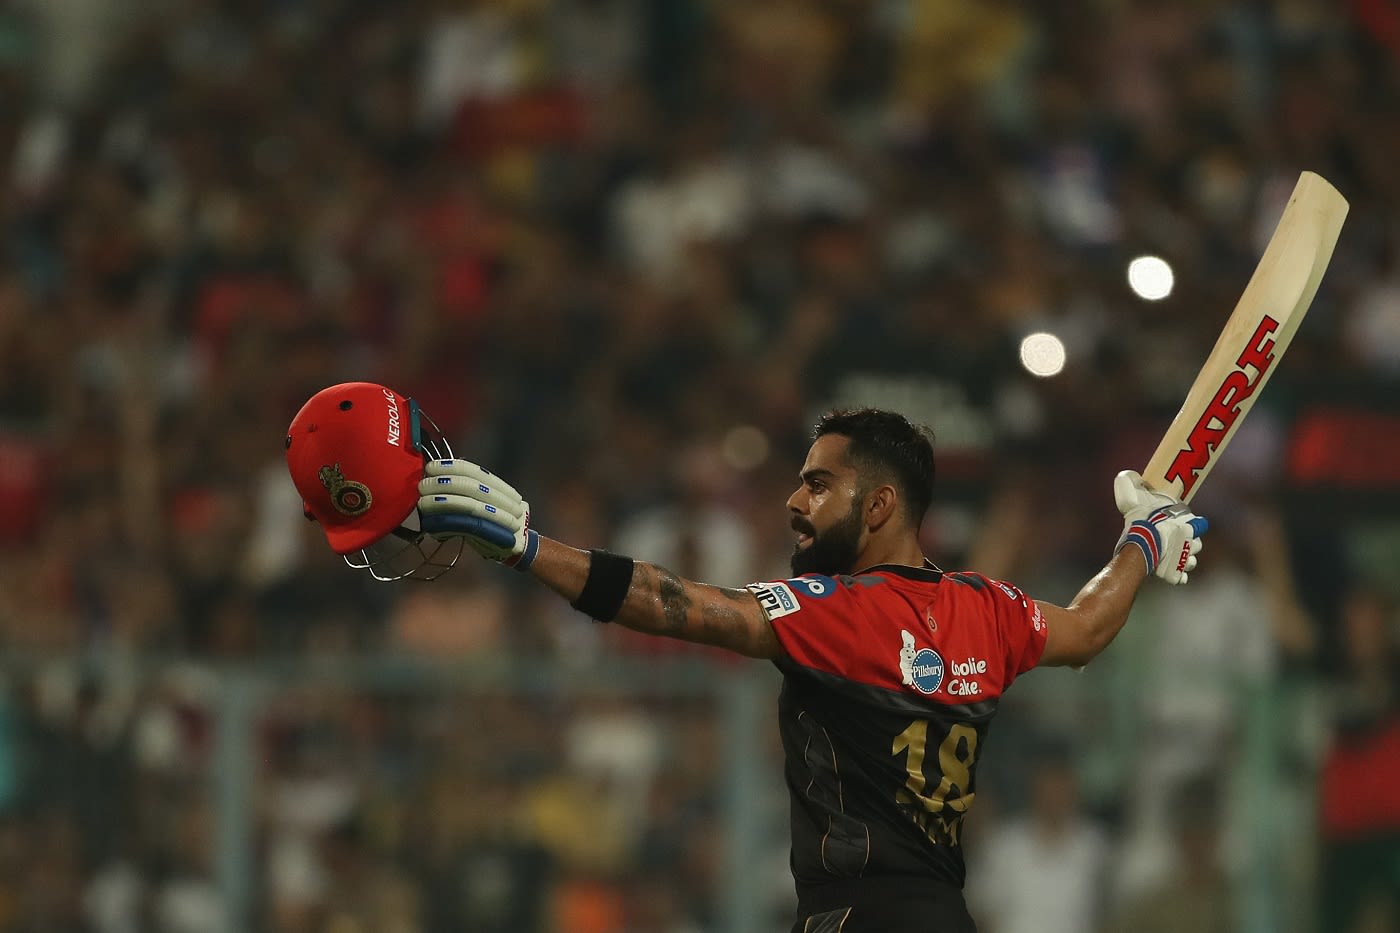 Watch: Virat Gets Cake-Faced Celebrating Birthday With RCB